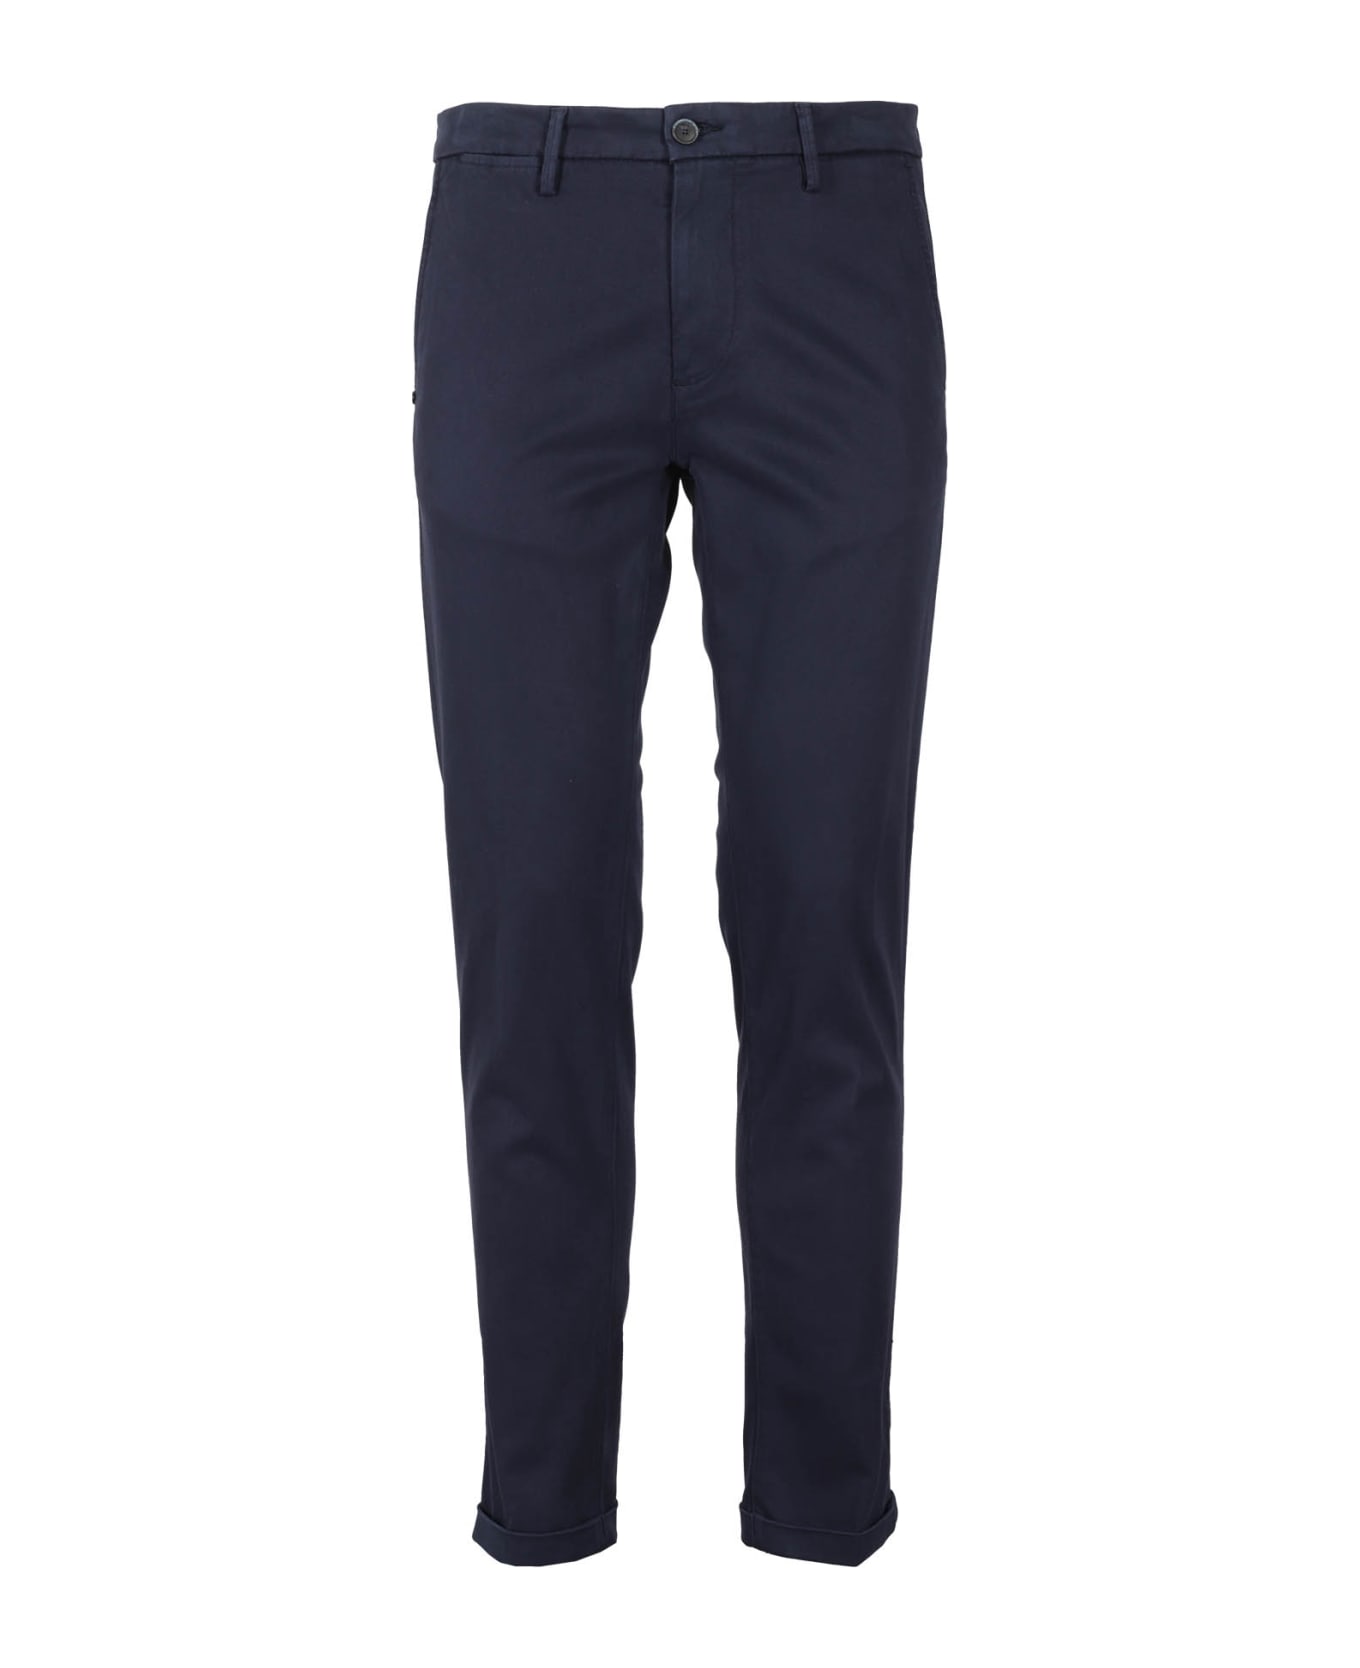 Re-HasH Mucha A Pant Uomo Core - Blue ボトムス